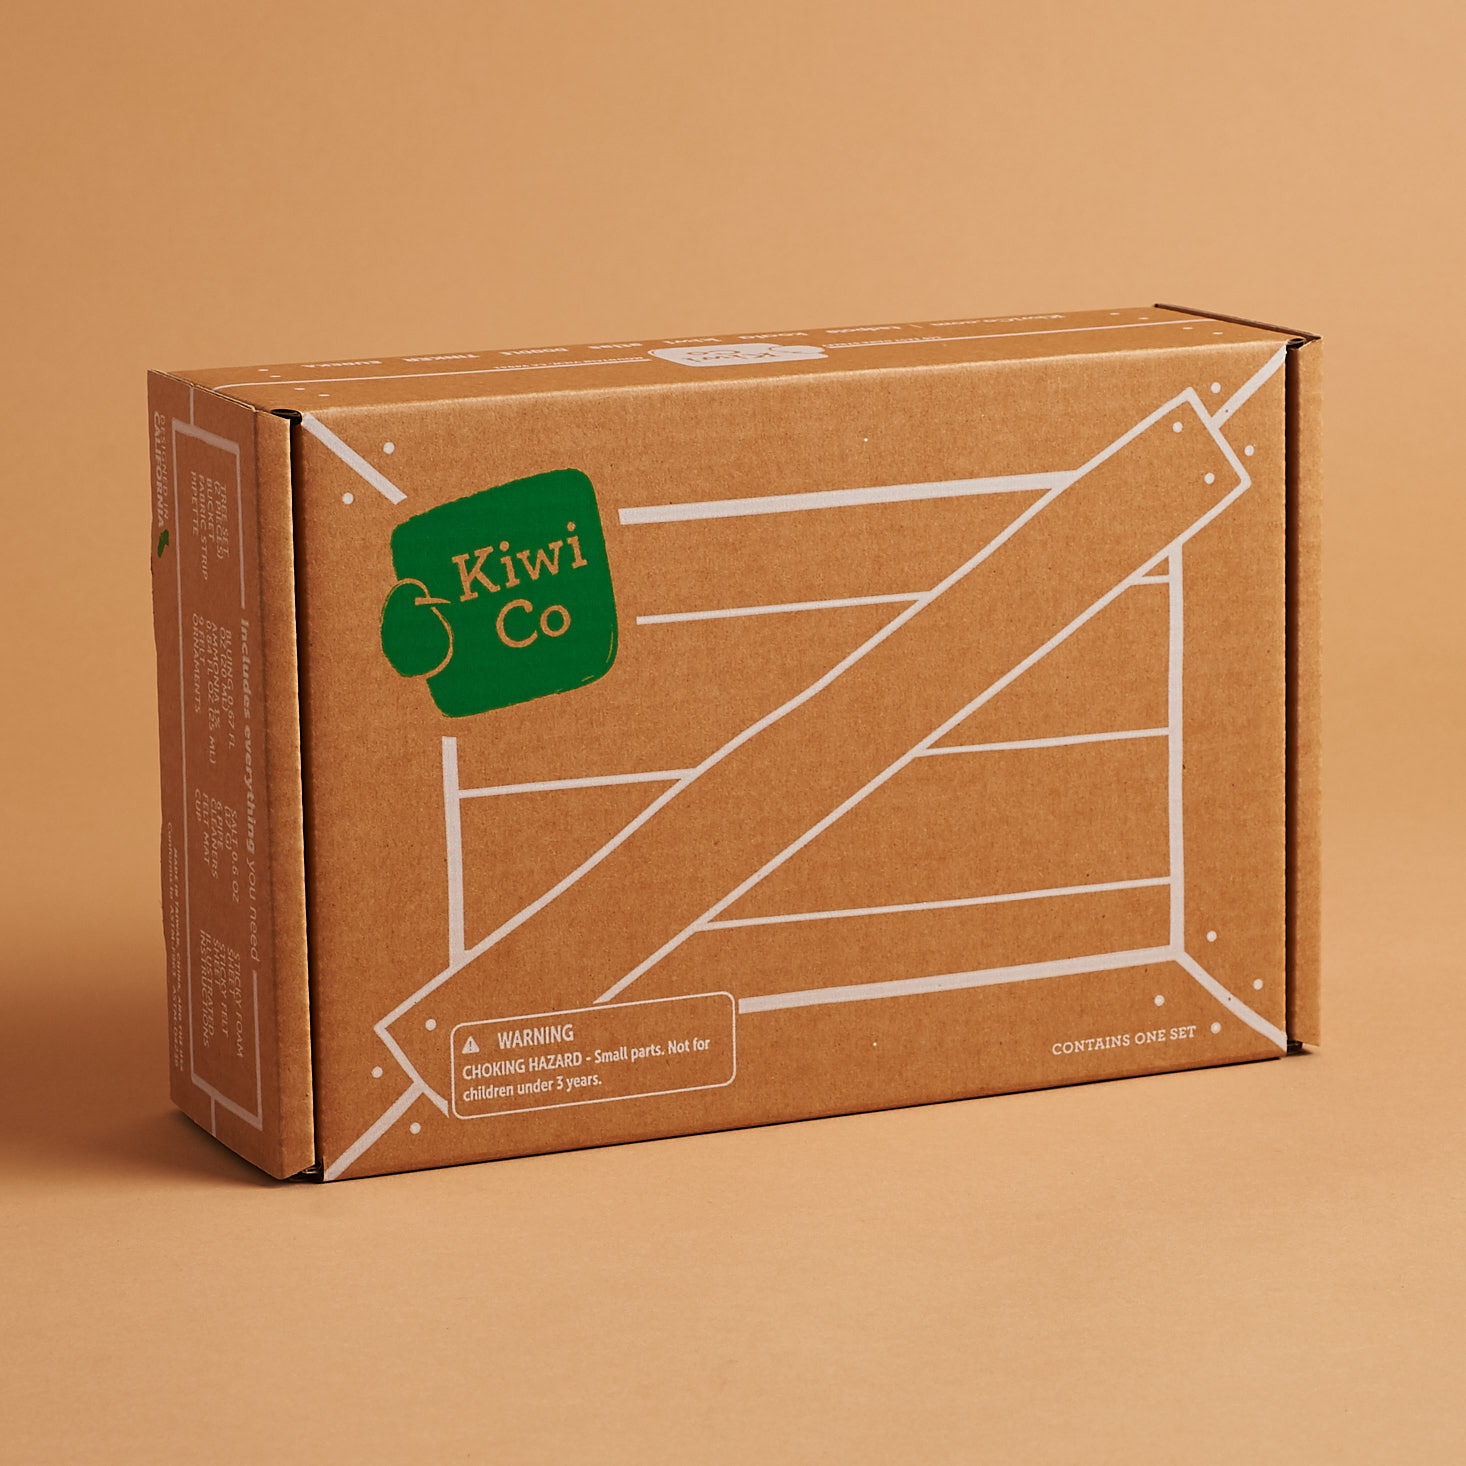 KiwiCo – Last Day for Holiday Shipping + Get Your First Box for $4.95!